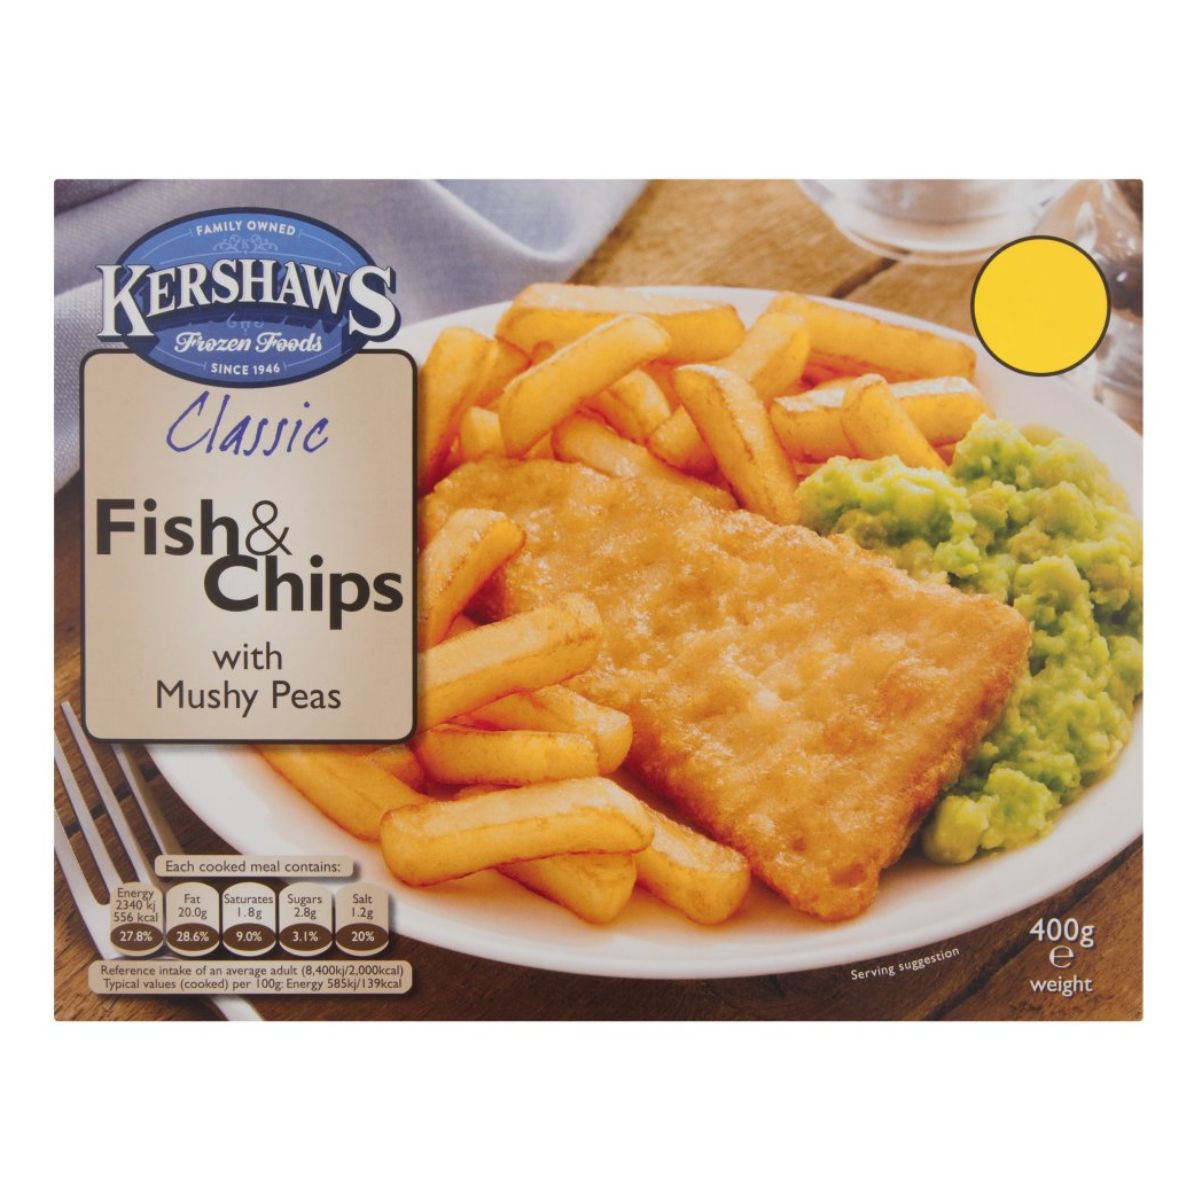 Kershaws - Classic Fish & Chips with Mushy Peas - 400g fish and chips with peas.